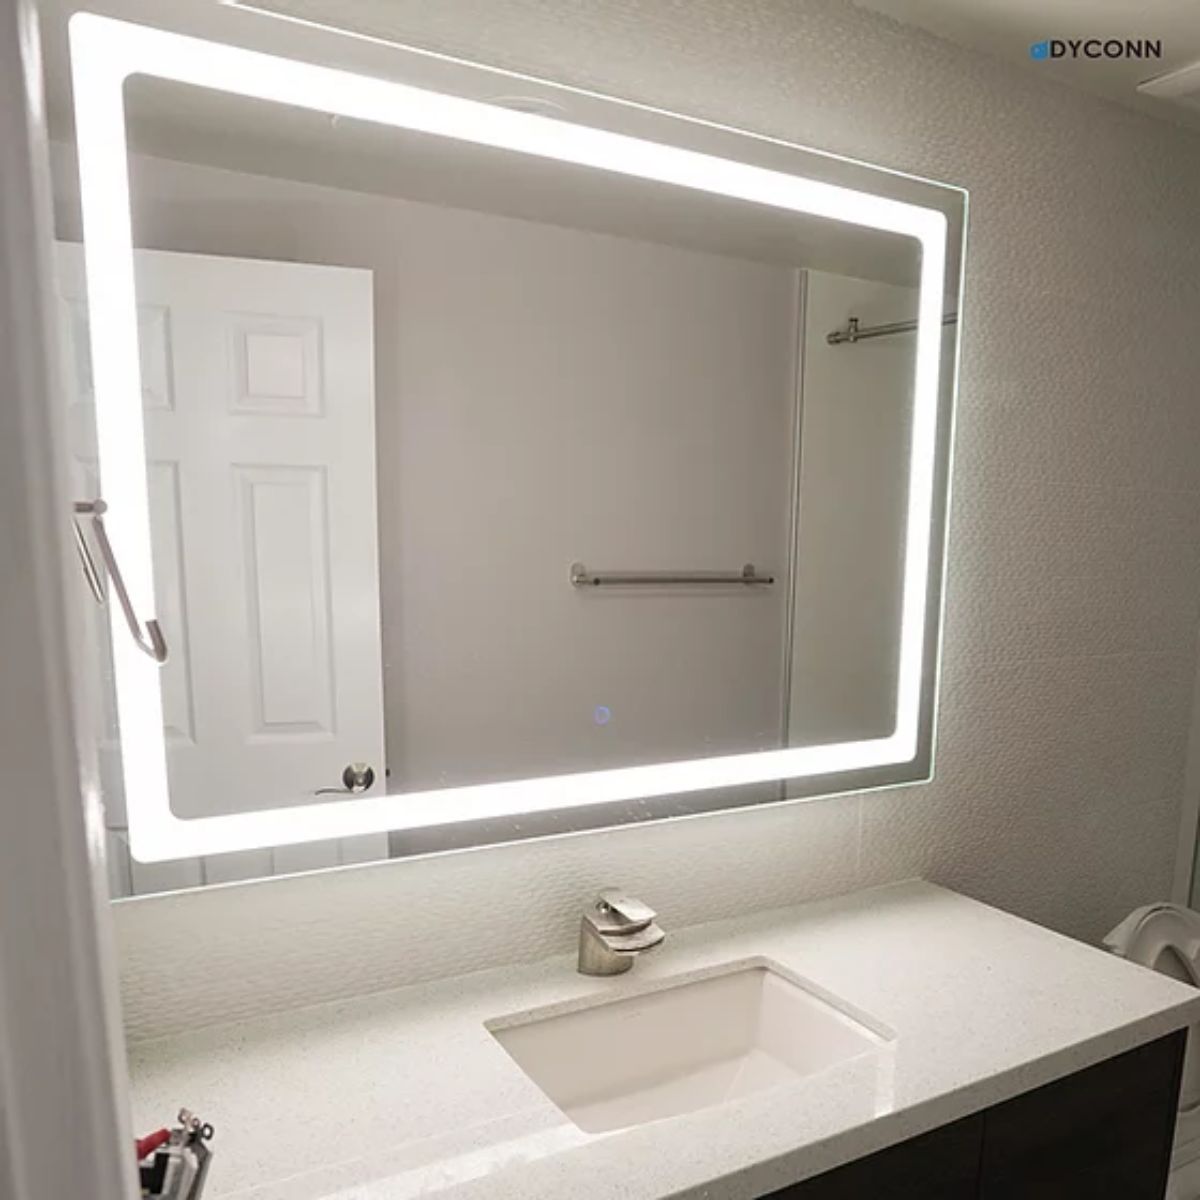 Swan 48 in. x 36 in. LED Wall Mirror with Touch On/Off Dimmer Function